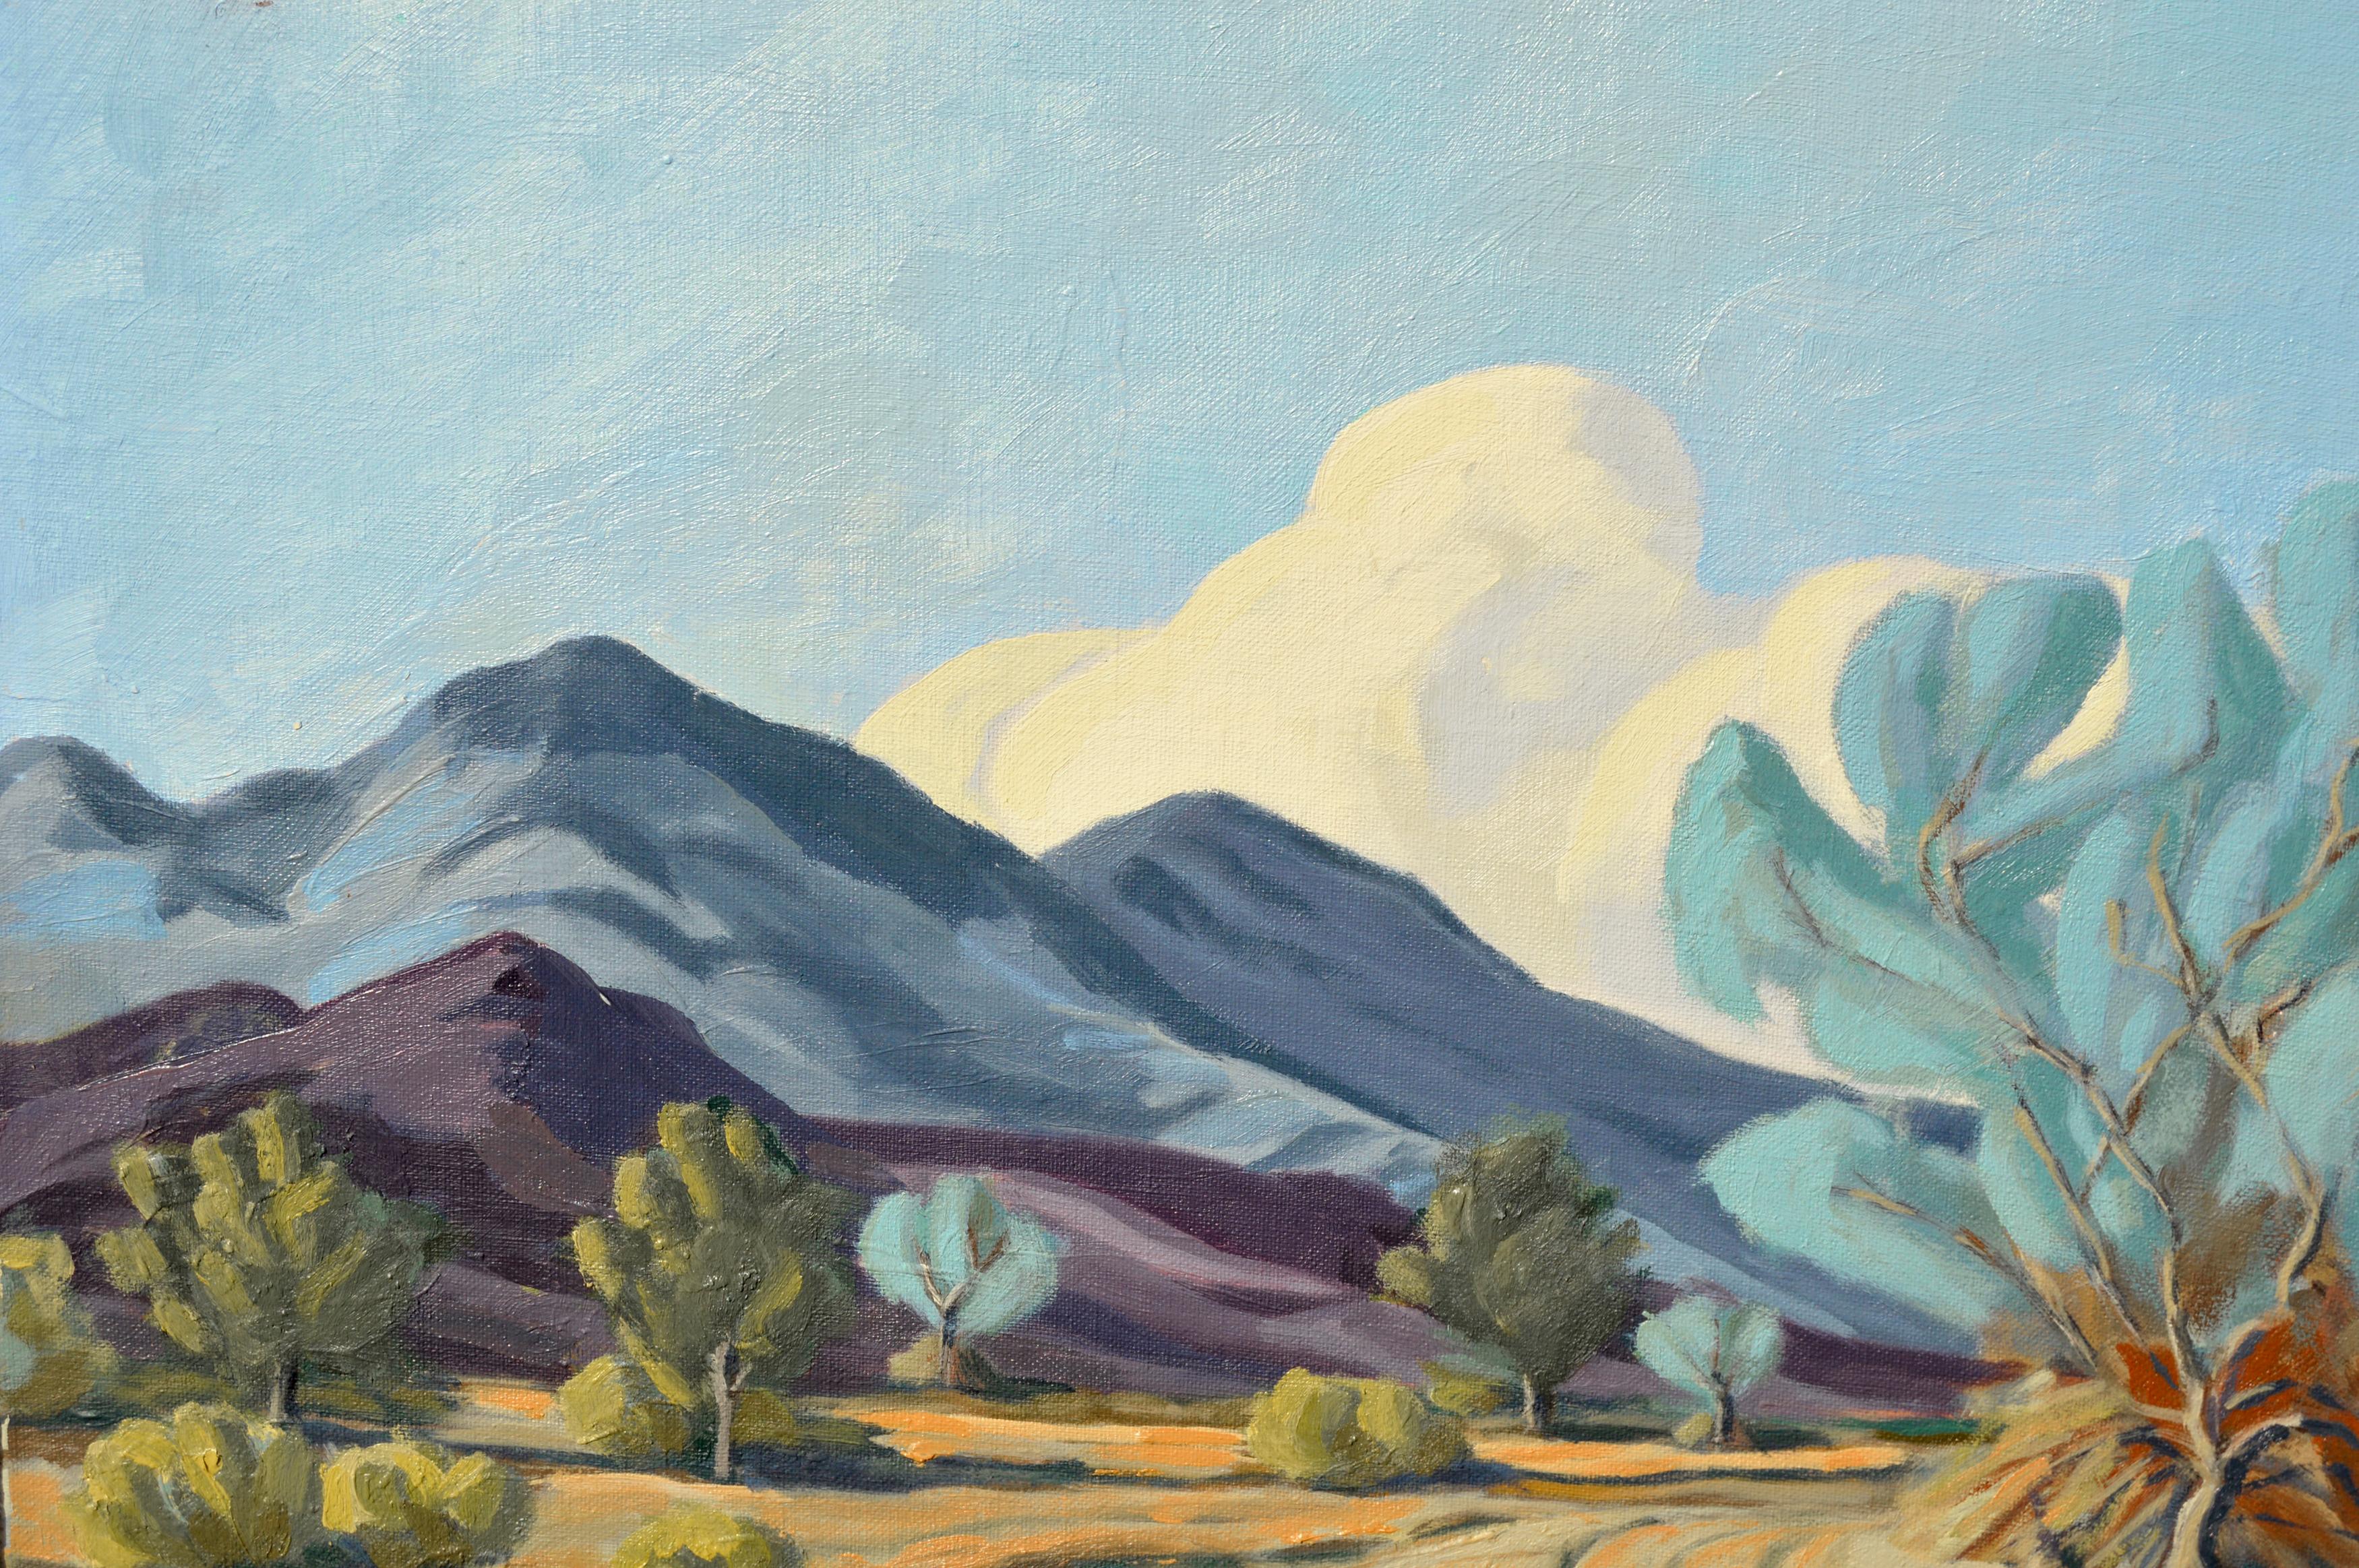 Smoke Tree on Desert Road Landscape - Painting by George W. Courtney